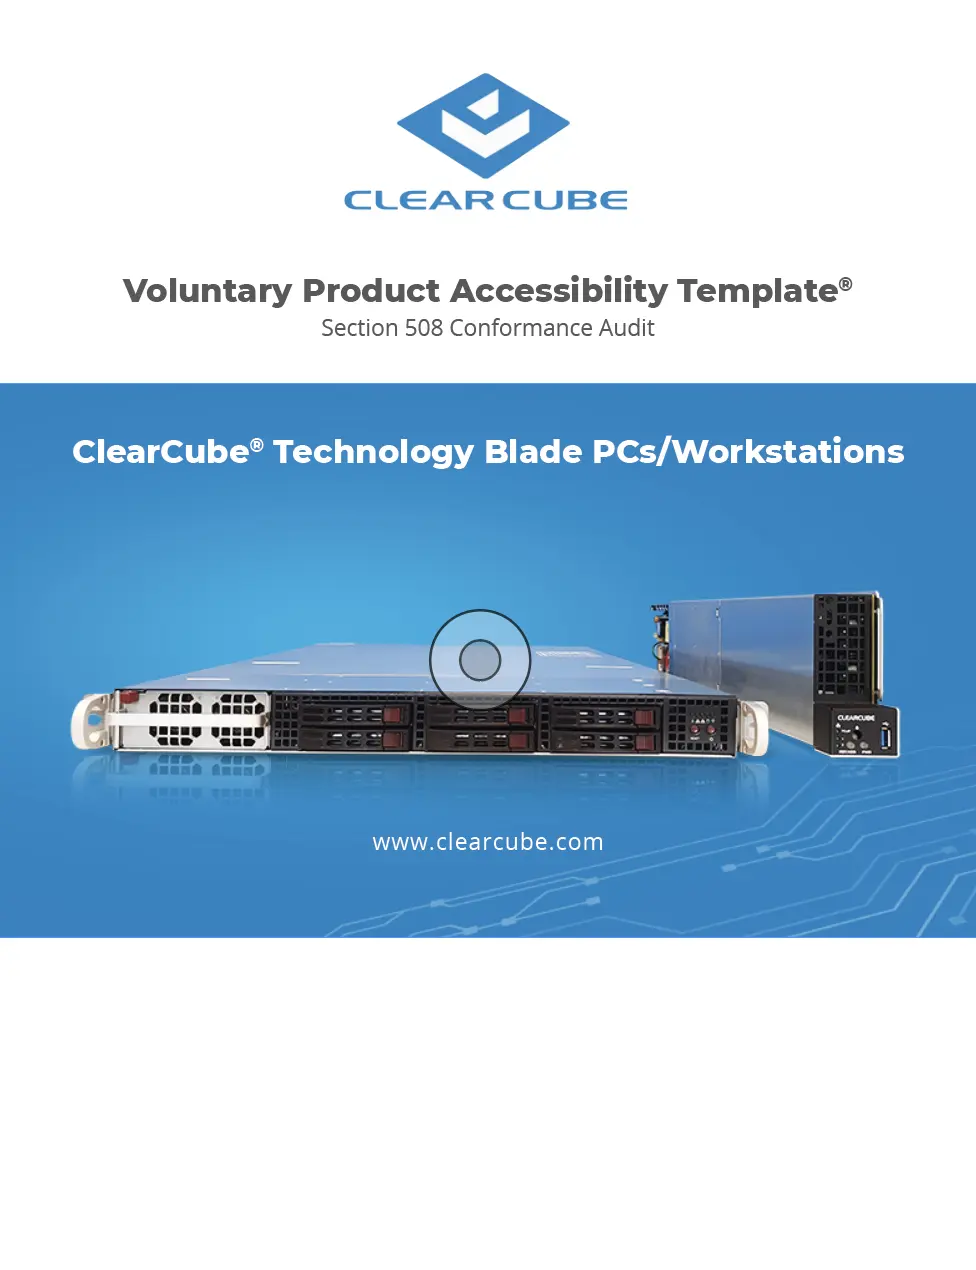 This Voluntary Product Accessibility Template (VPAT) provides guidance on the accessibility characteristics of ClearCube Workstations and Blade PCs